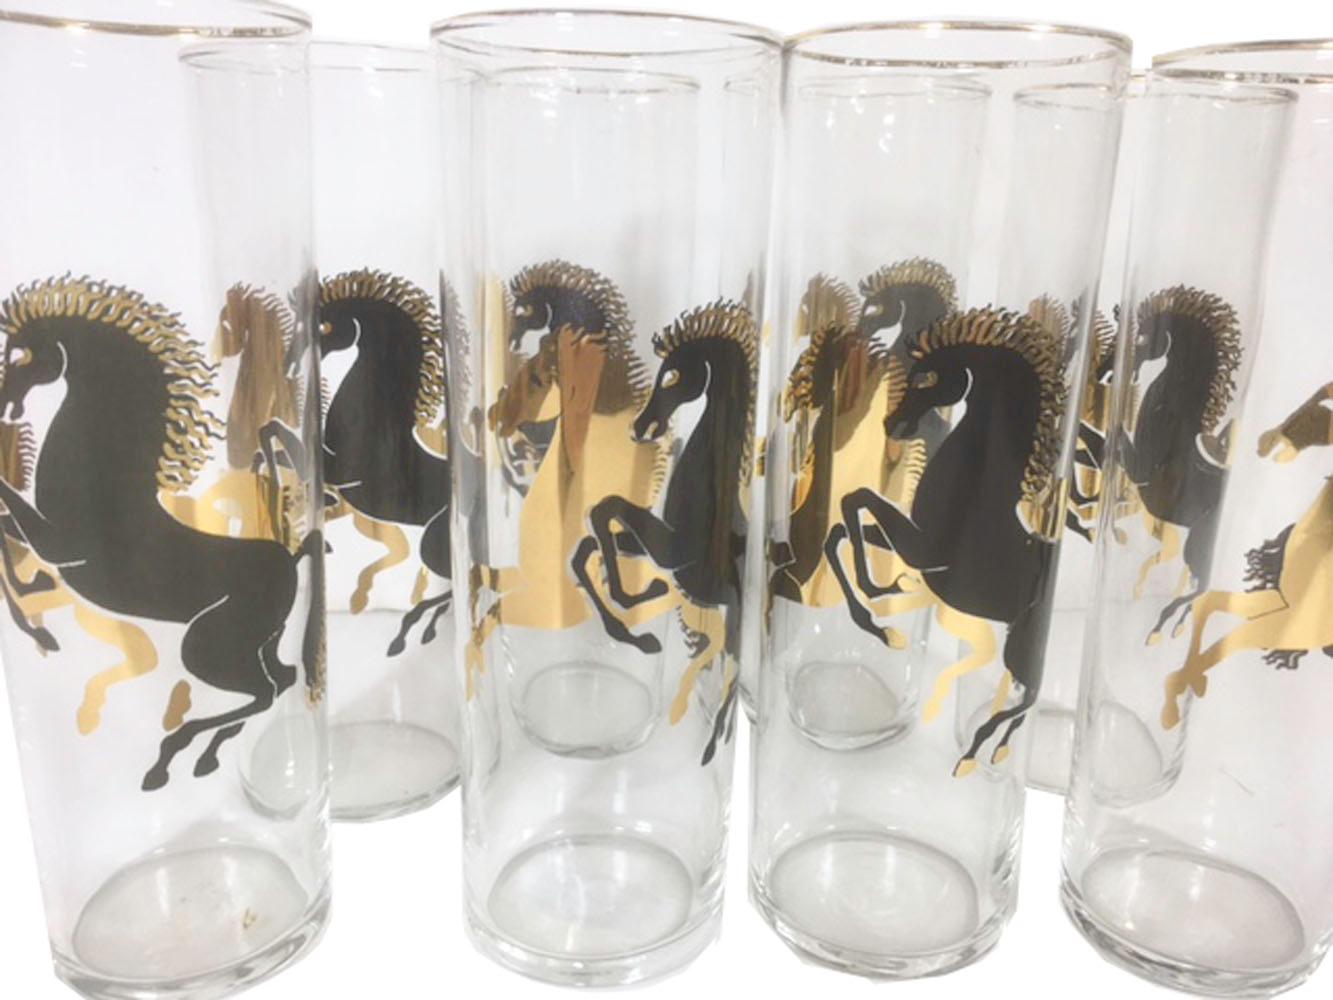 Eight vintage Tom Collins glasses with a pair of rearing stallions shadowing each other one in 22k gold the other in black enamel with gold details.